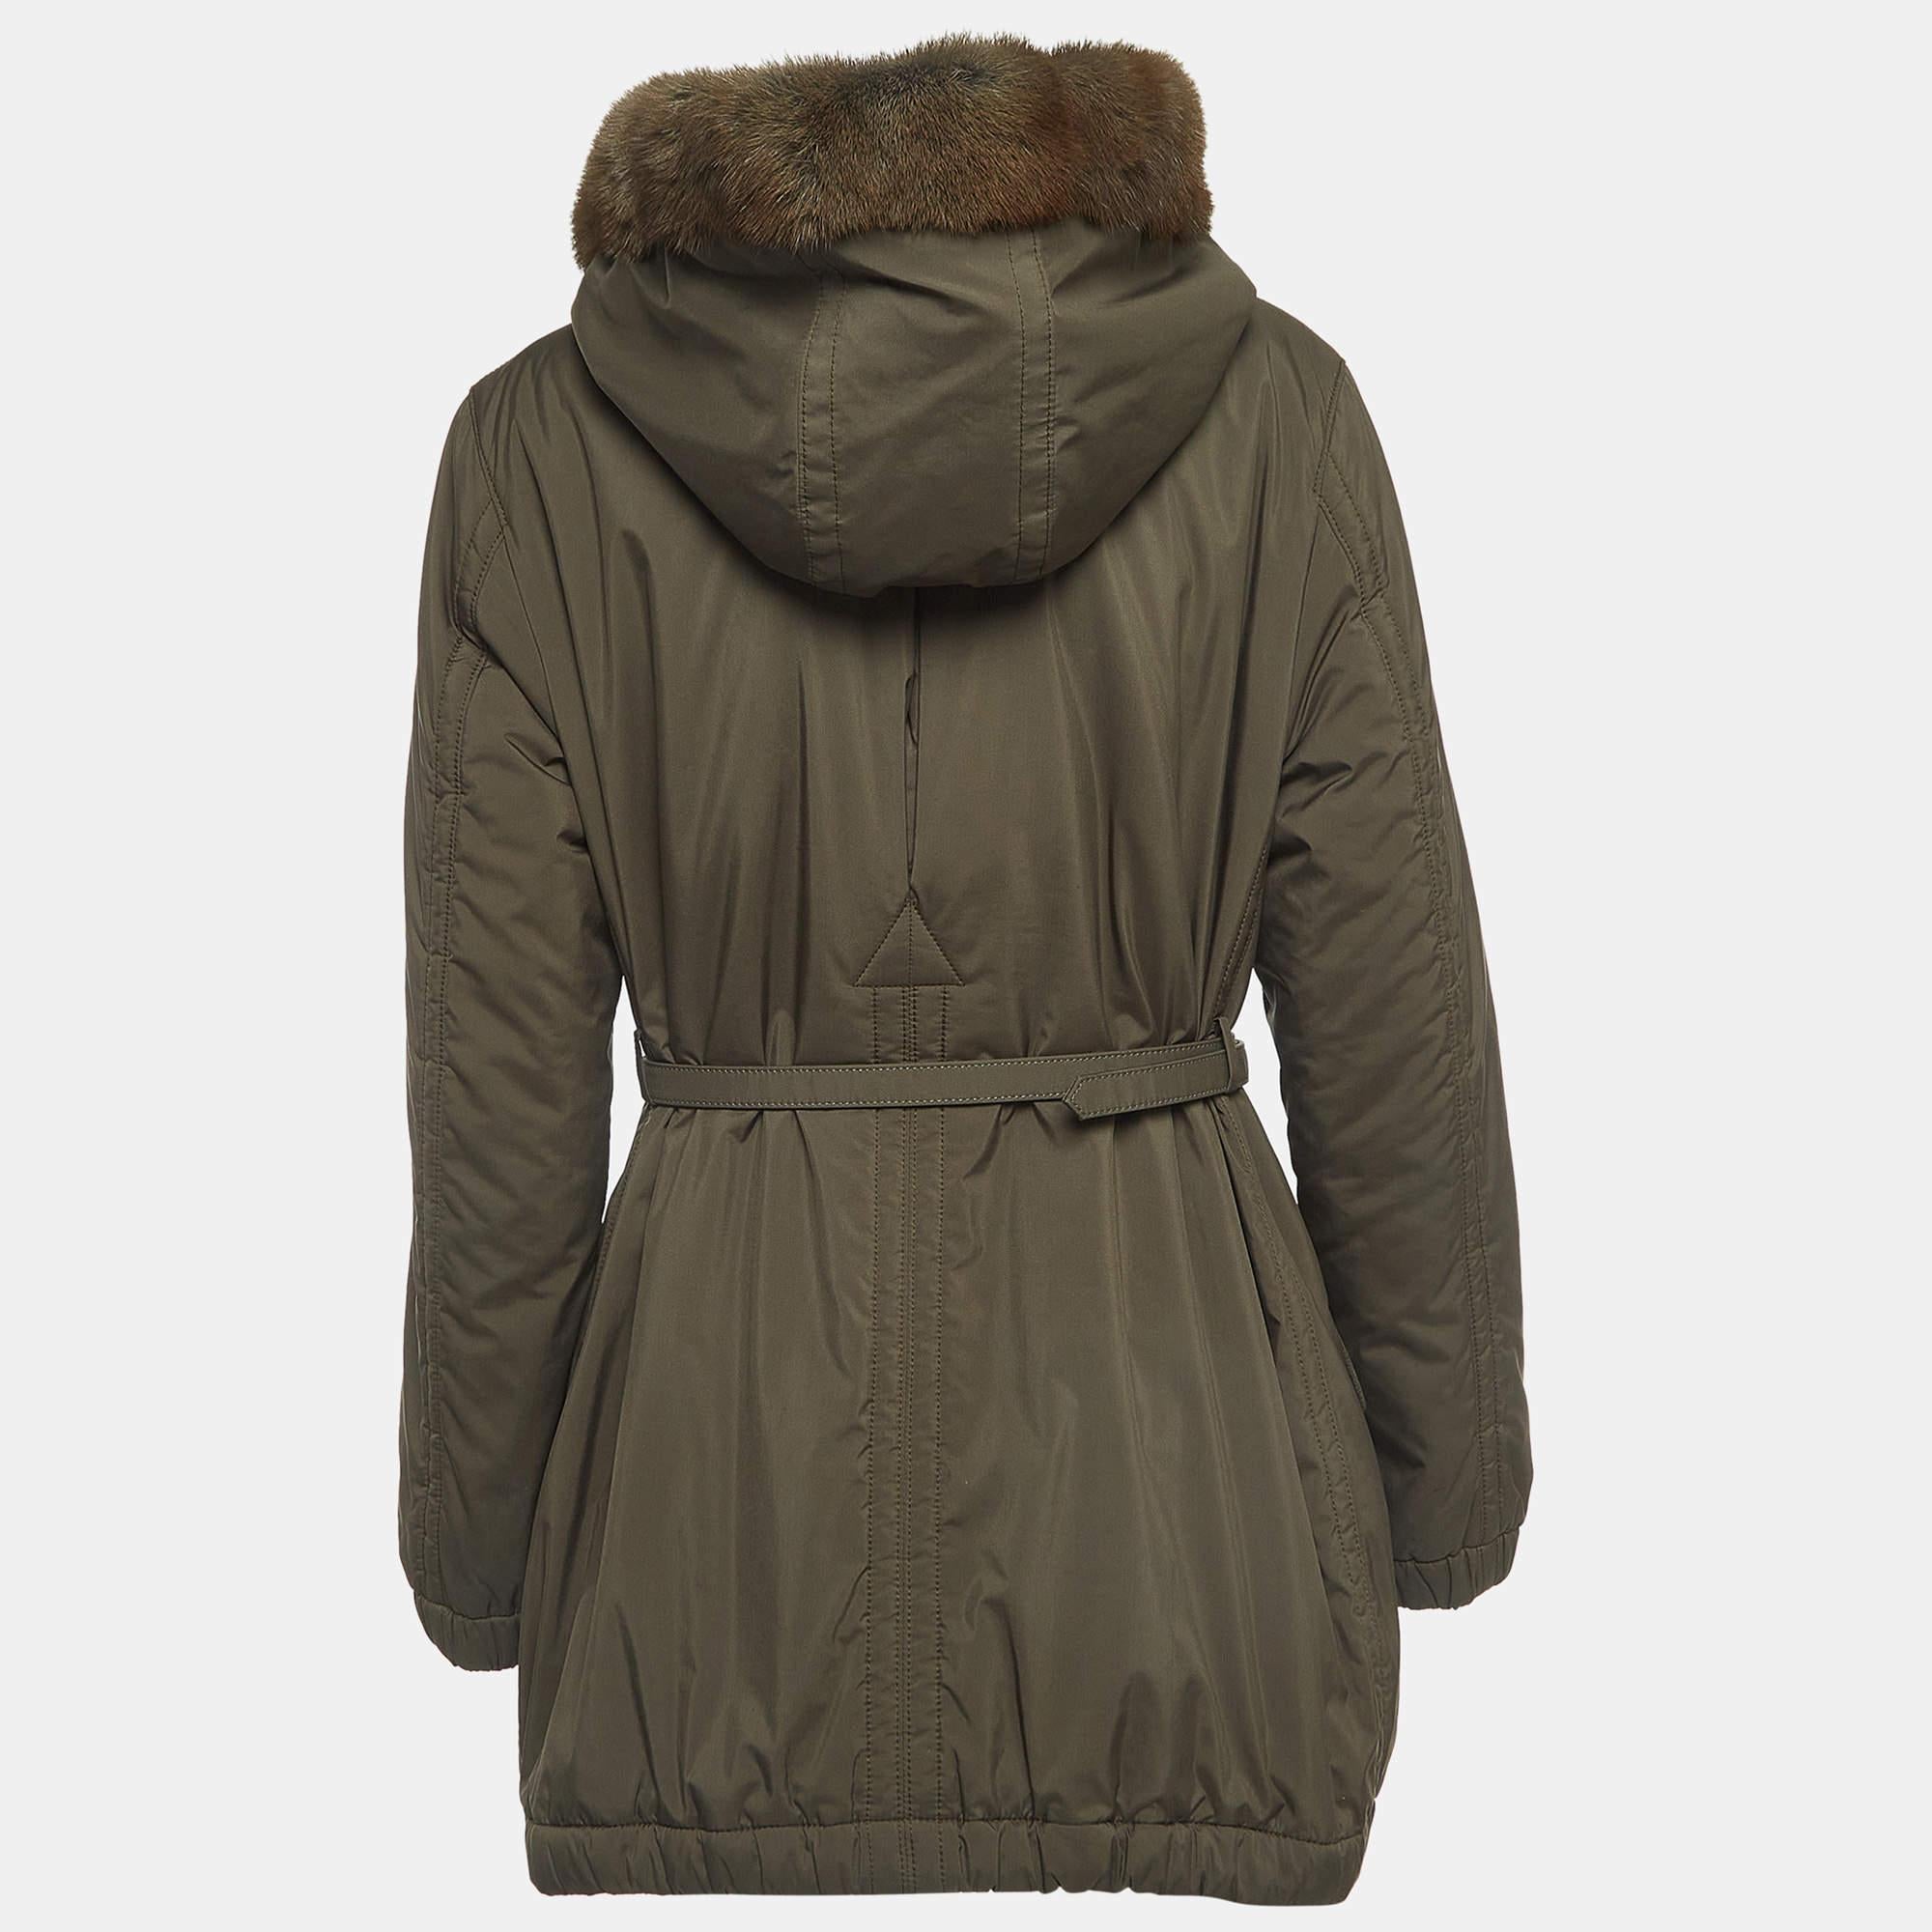 The Loro Piana Parka Jacket combines style and functionality. Crafted from durable nylon with Storm System technology, it offers superior protection against the elements. Featuring a rich brown hue, it exudes sophistication while ensuring optimal